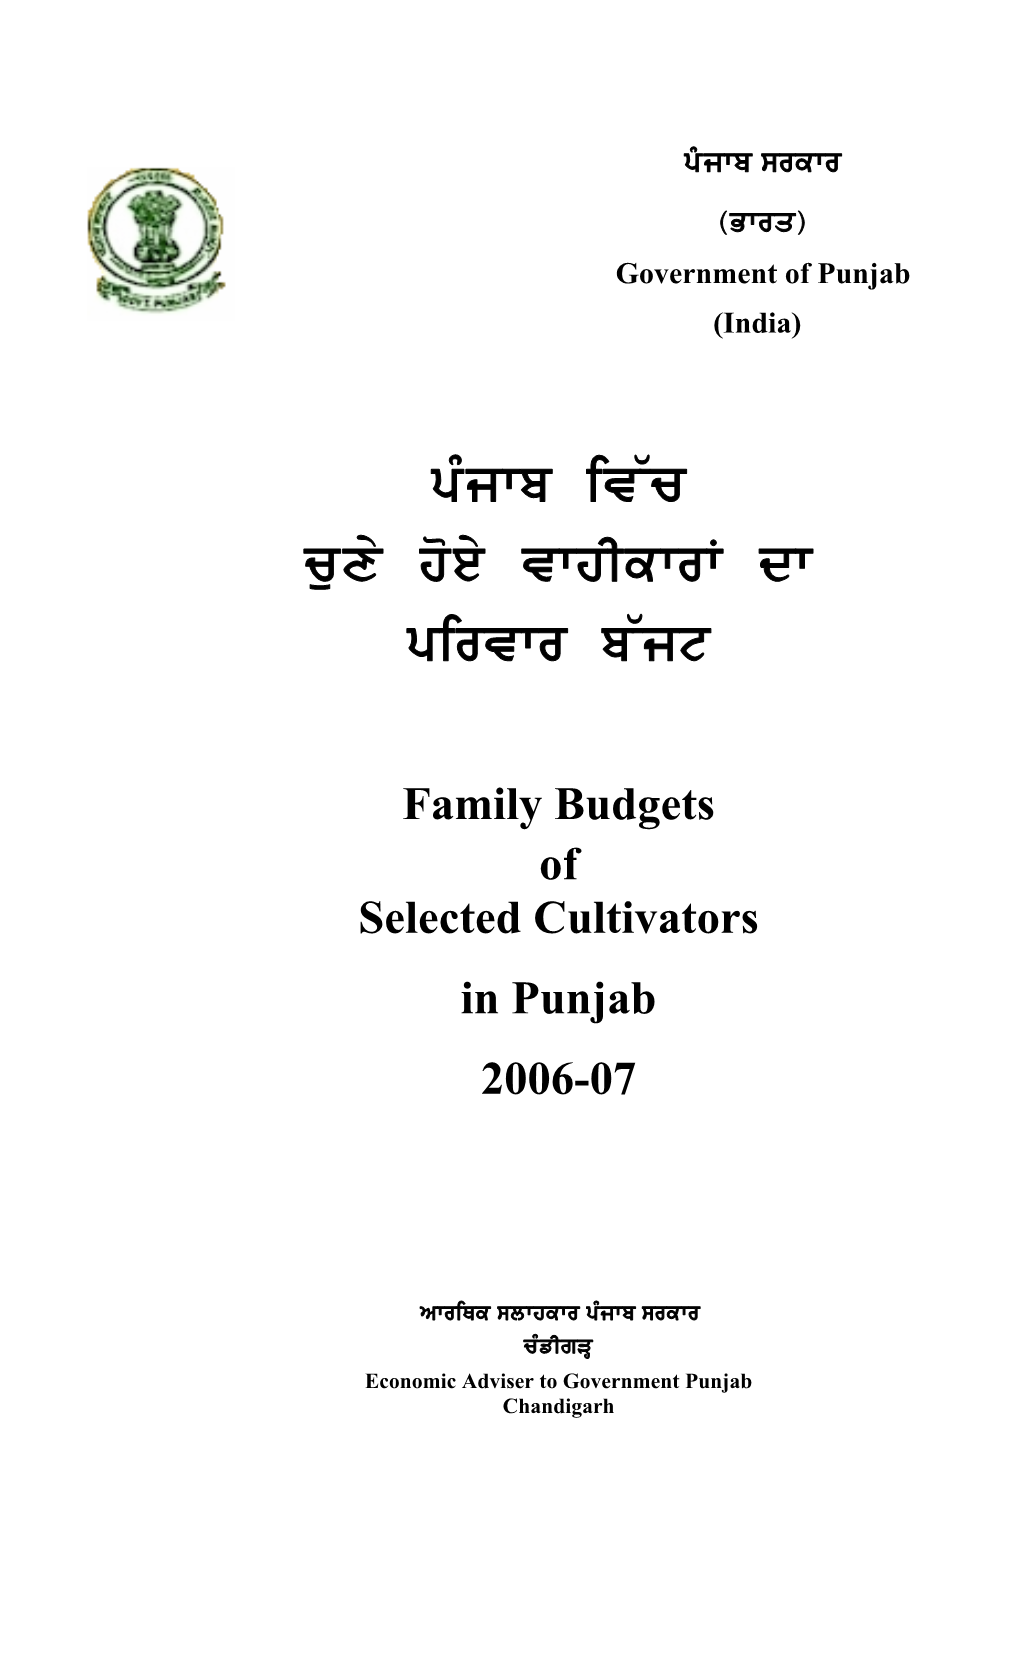 Family Budget of Selected Cultivators in Punjab 2006-07